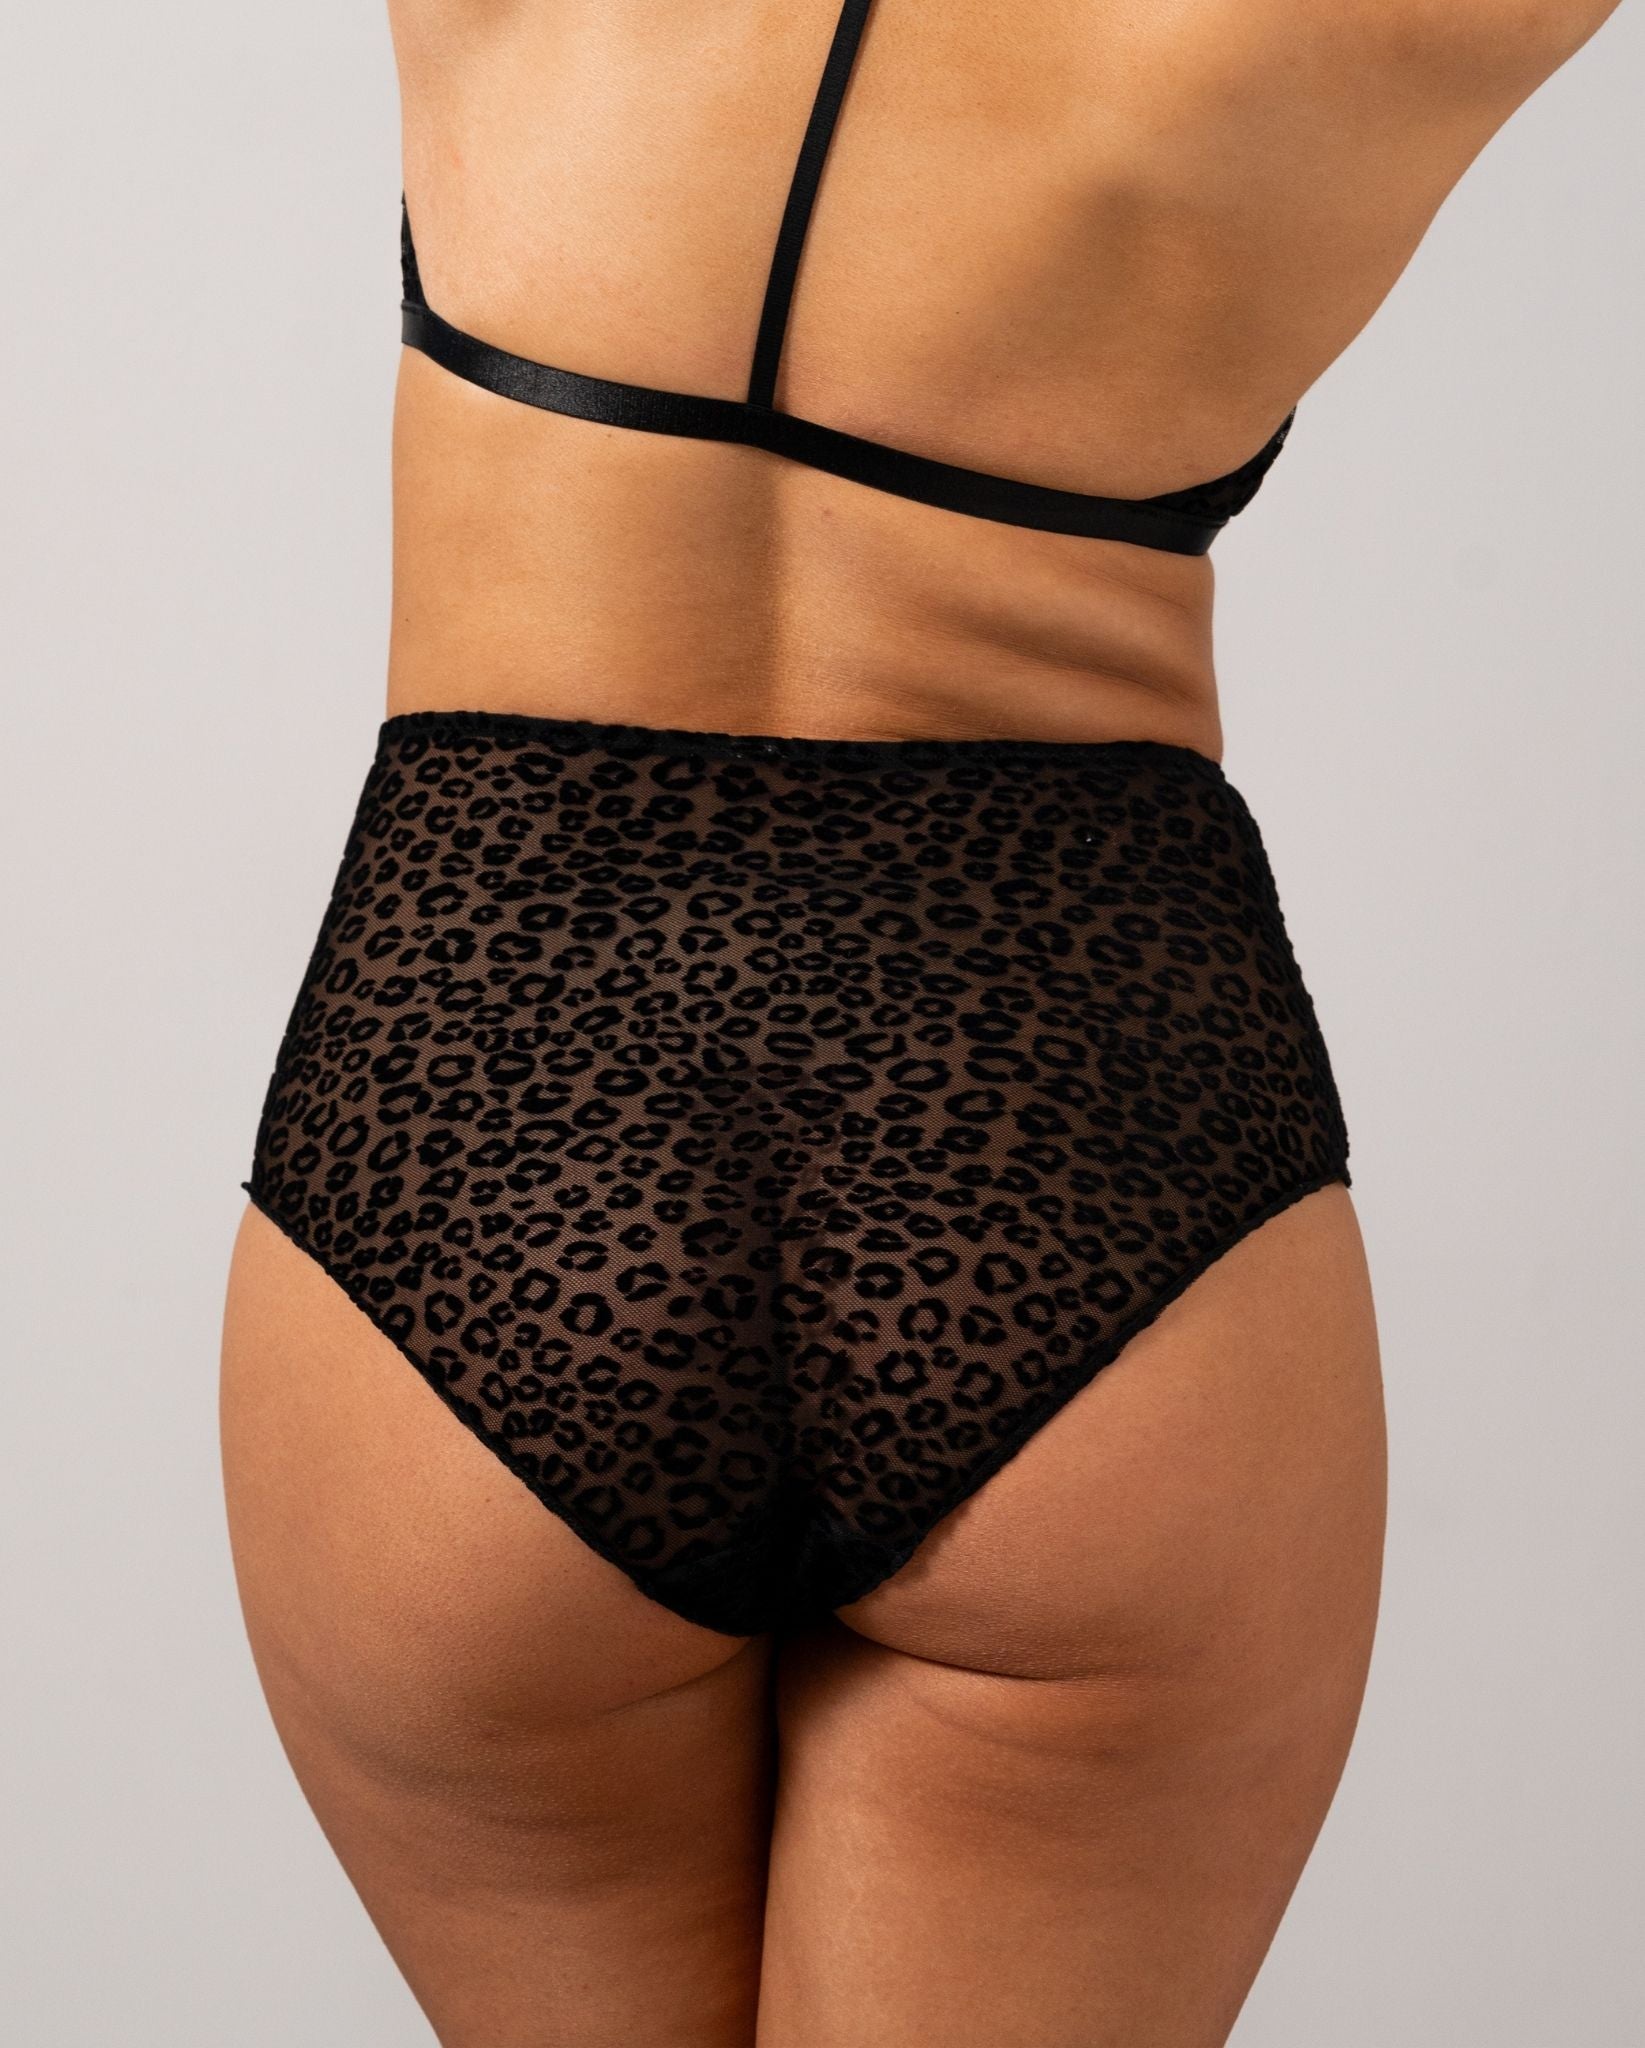  Cool Black Leopard Women's High Waisted Underwear Soft Briefs  Breathable Panties : Sports & Outdoors